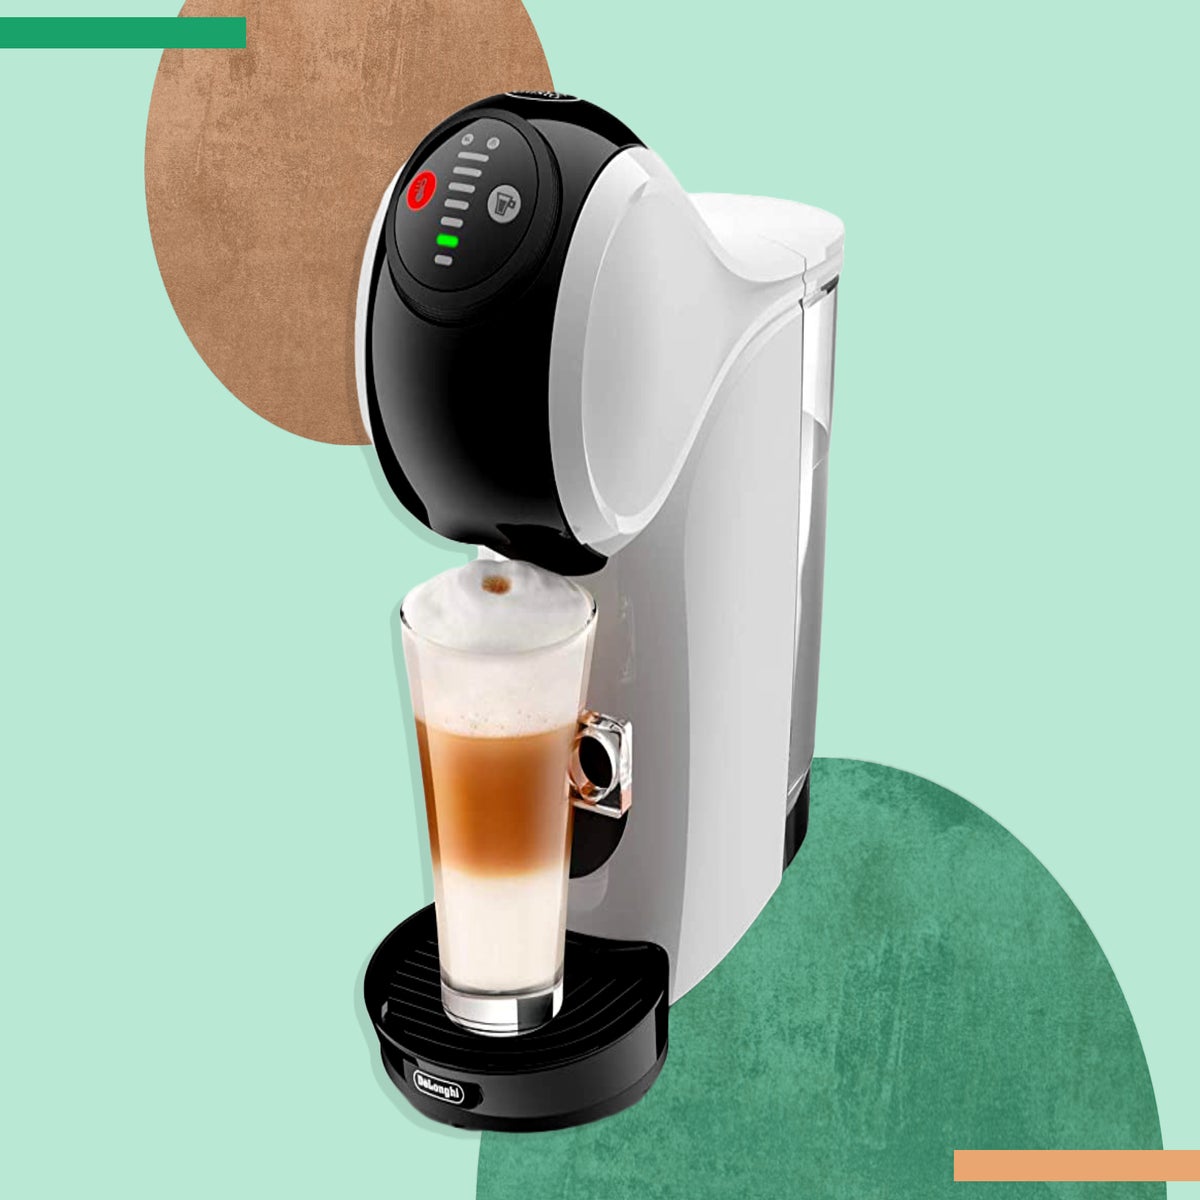 højdepunkt excentrisk shuttle Delonghi dolce gusto genio s review: Does this affordable coffee machine  deliver? | The Independent